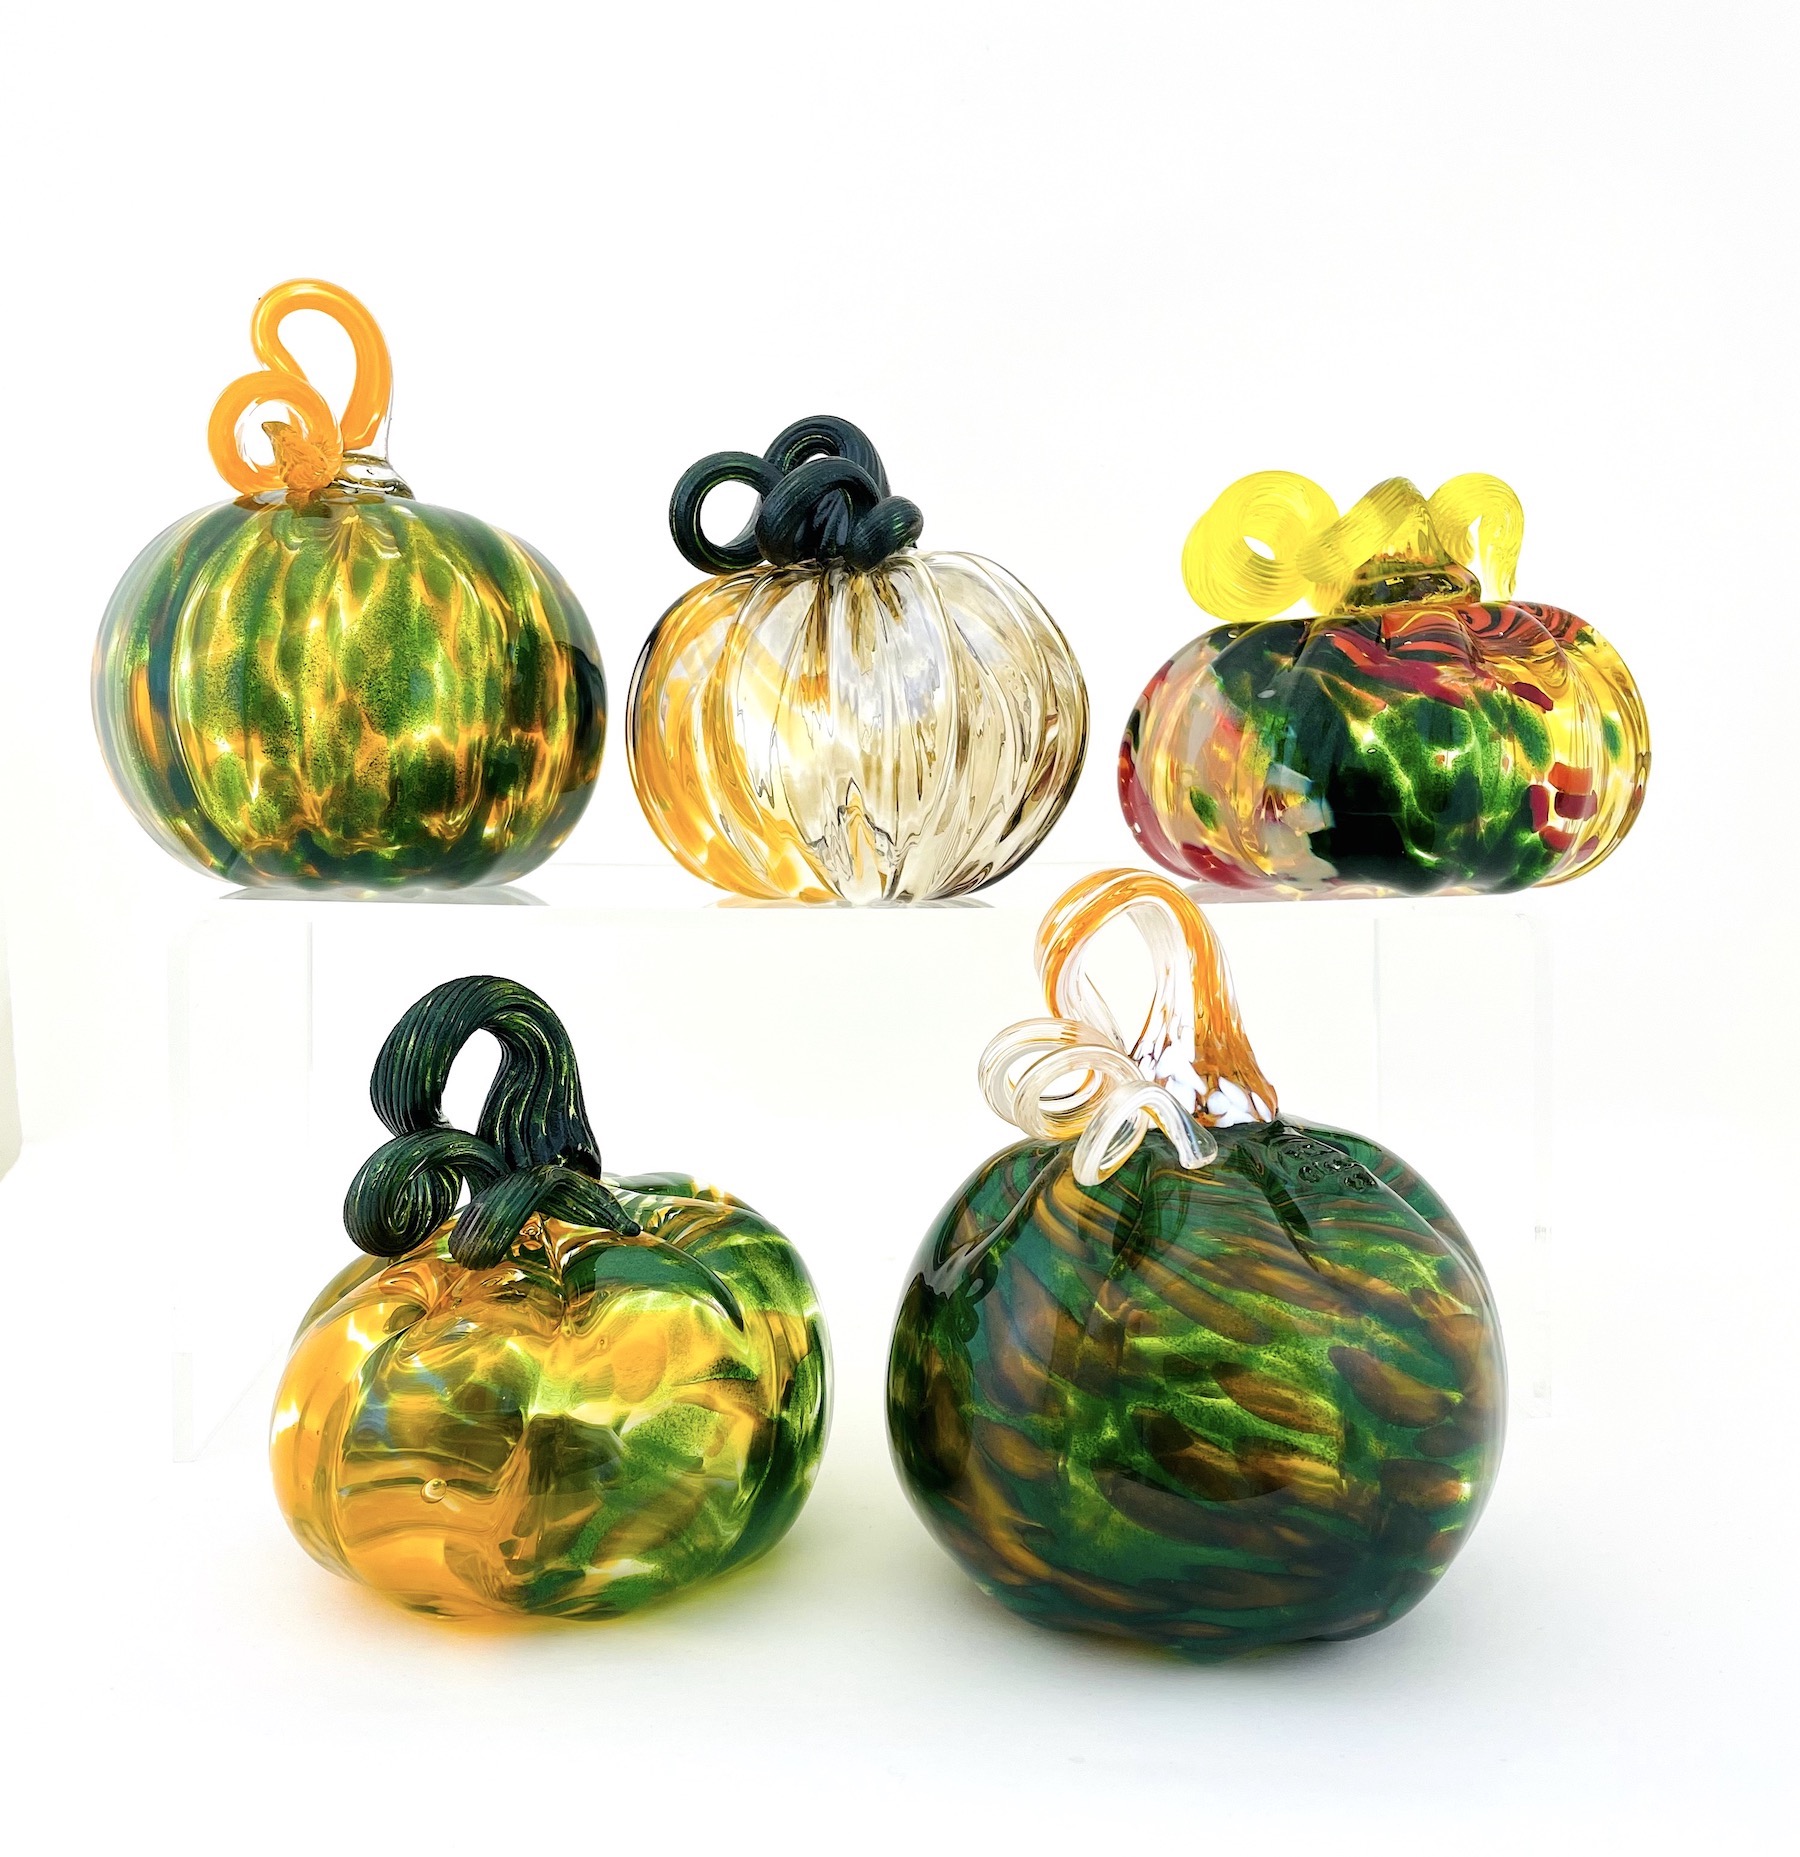 a group of five glass pumpkins with green bodies and curly stems.